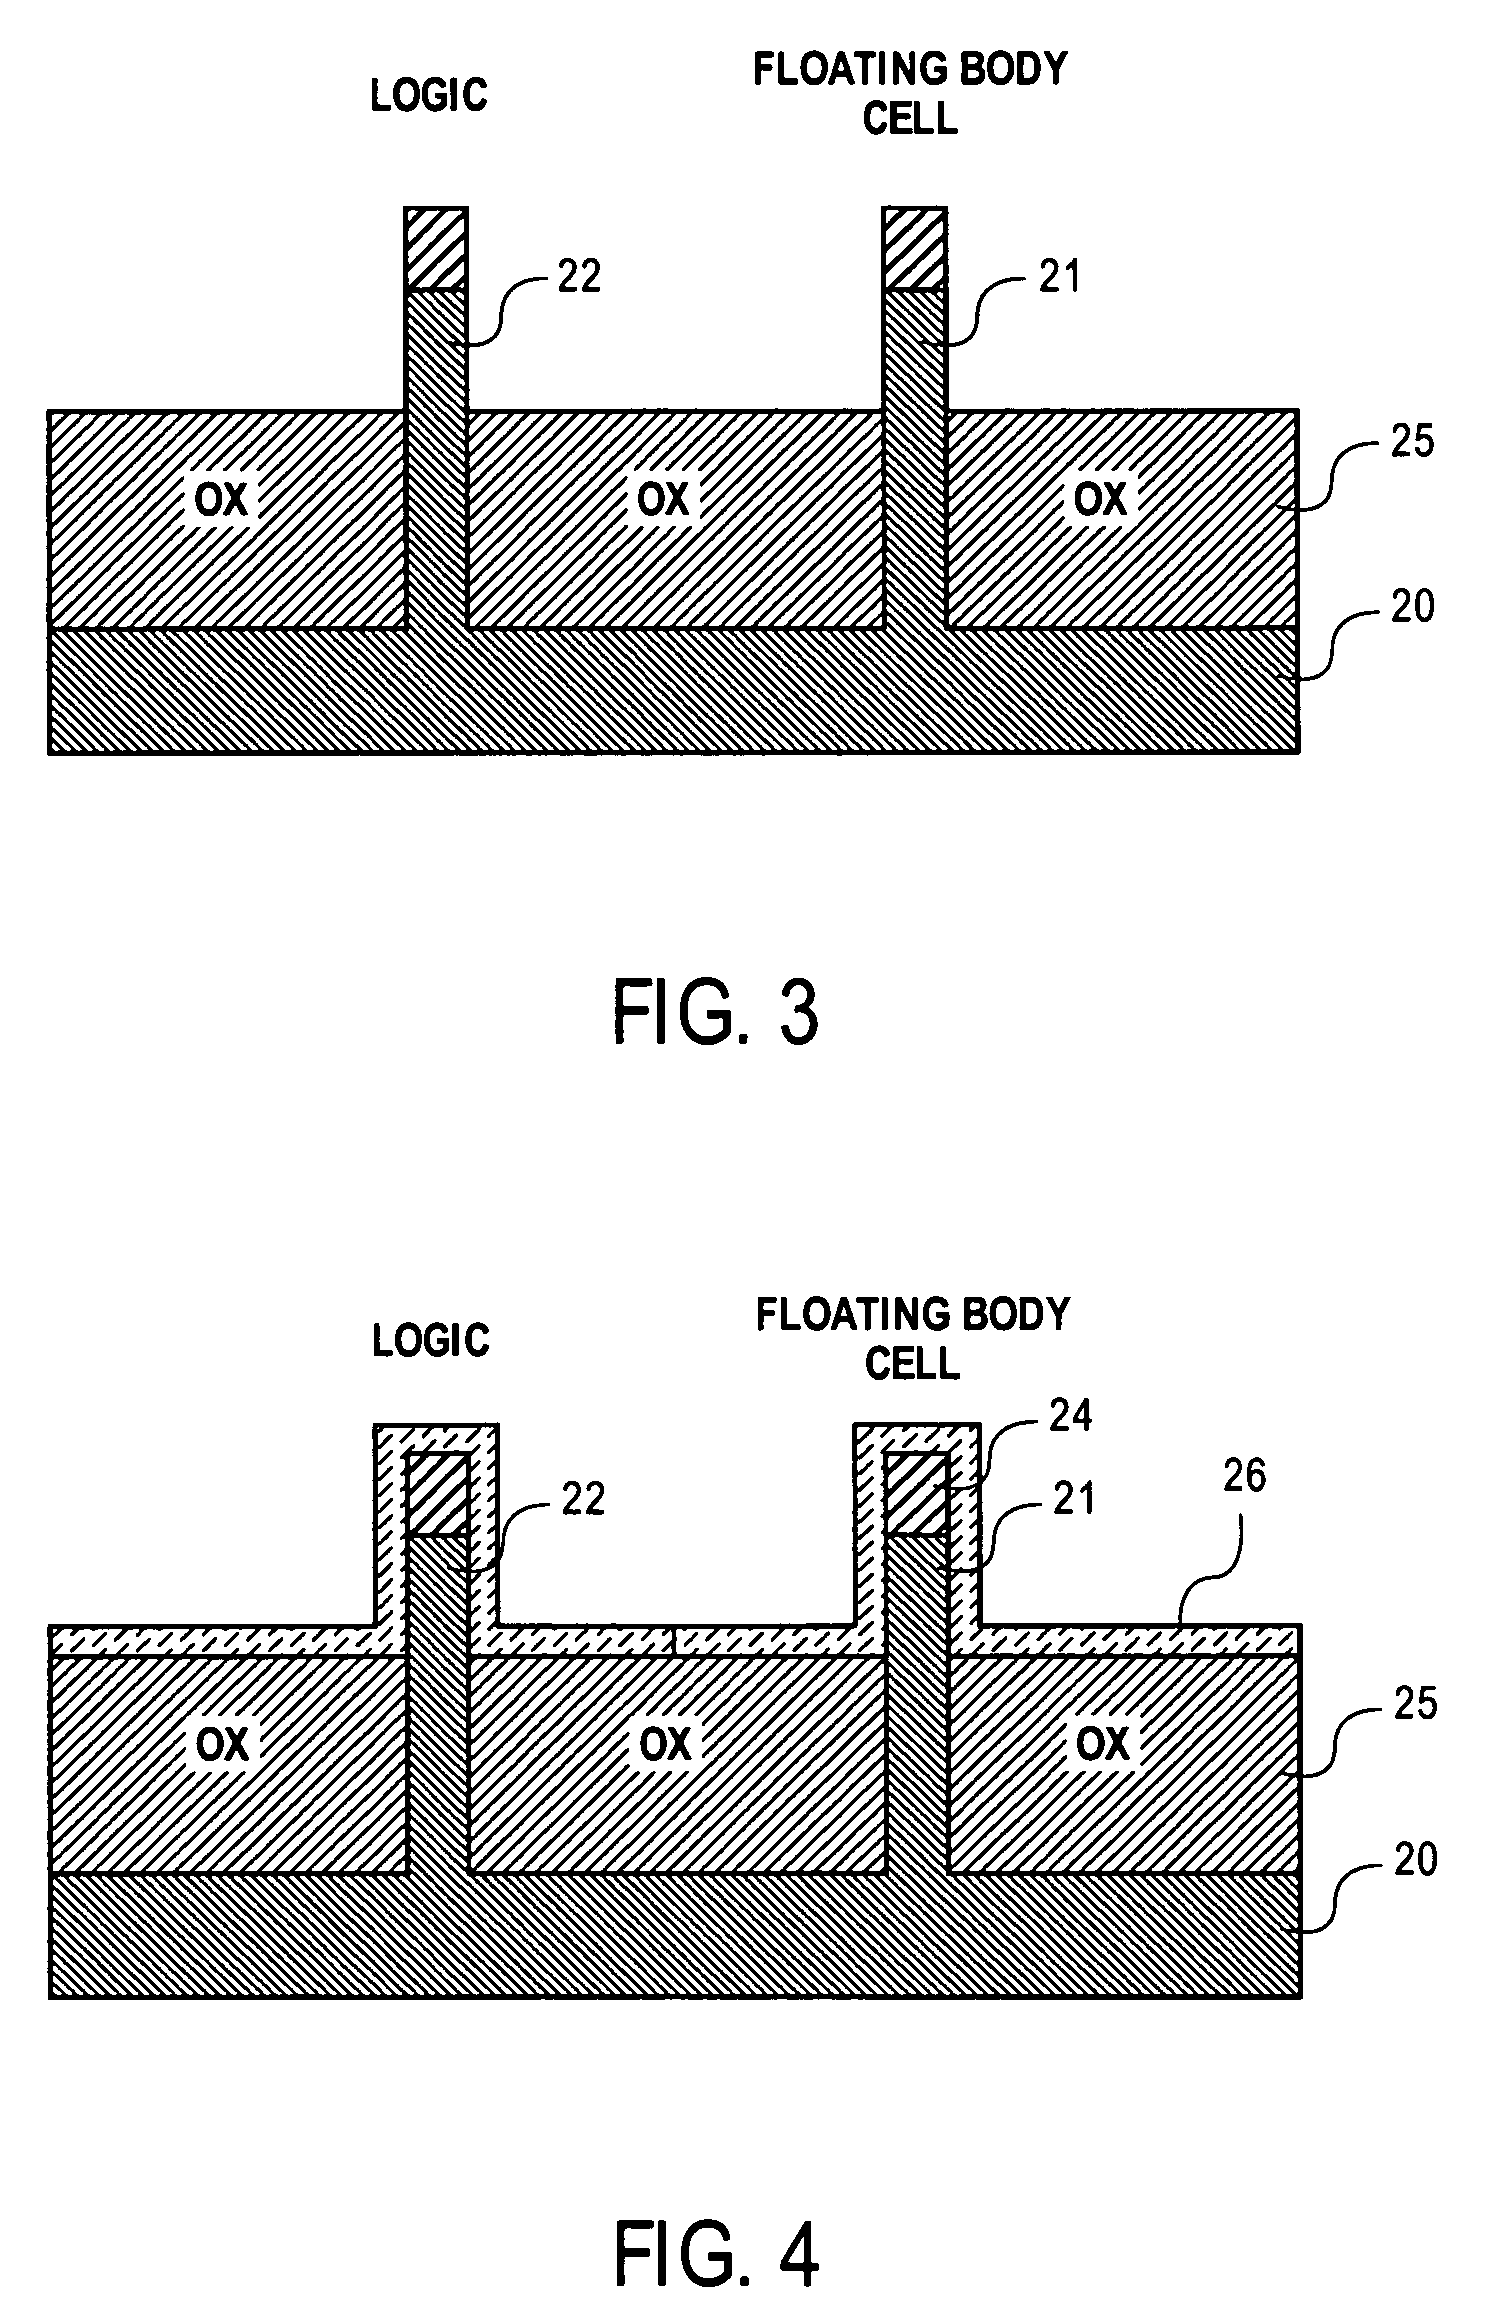 Method of combining floating body cell and logic transistors